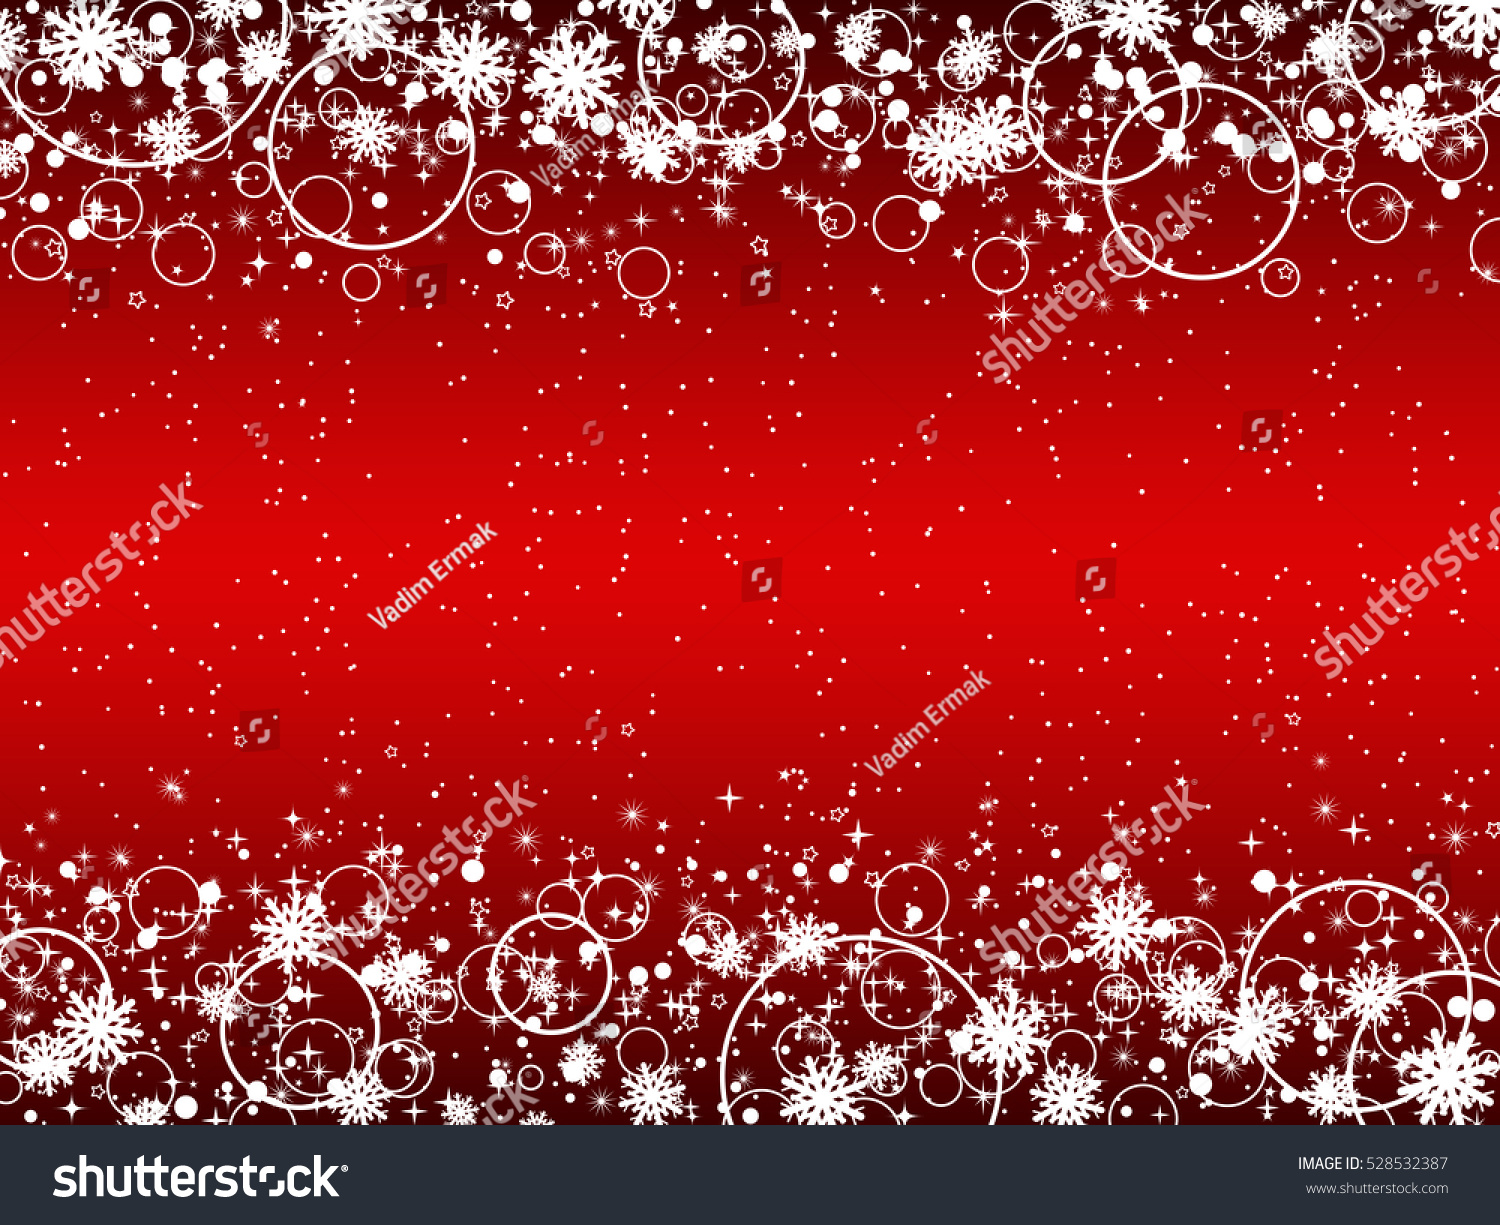 Christmas and New Year red vector background with snowflakes, stars and rings. #528532387